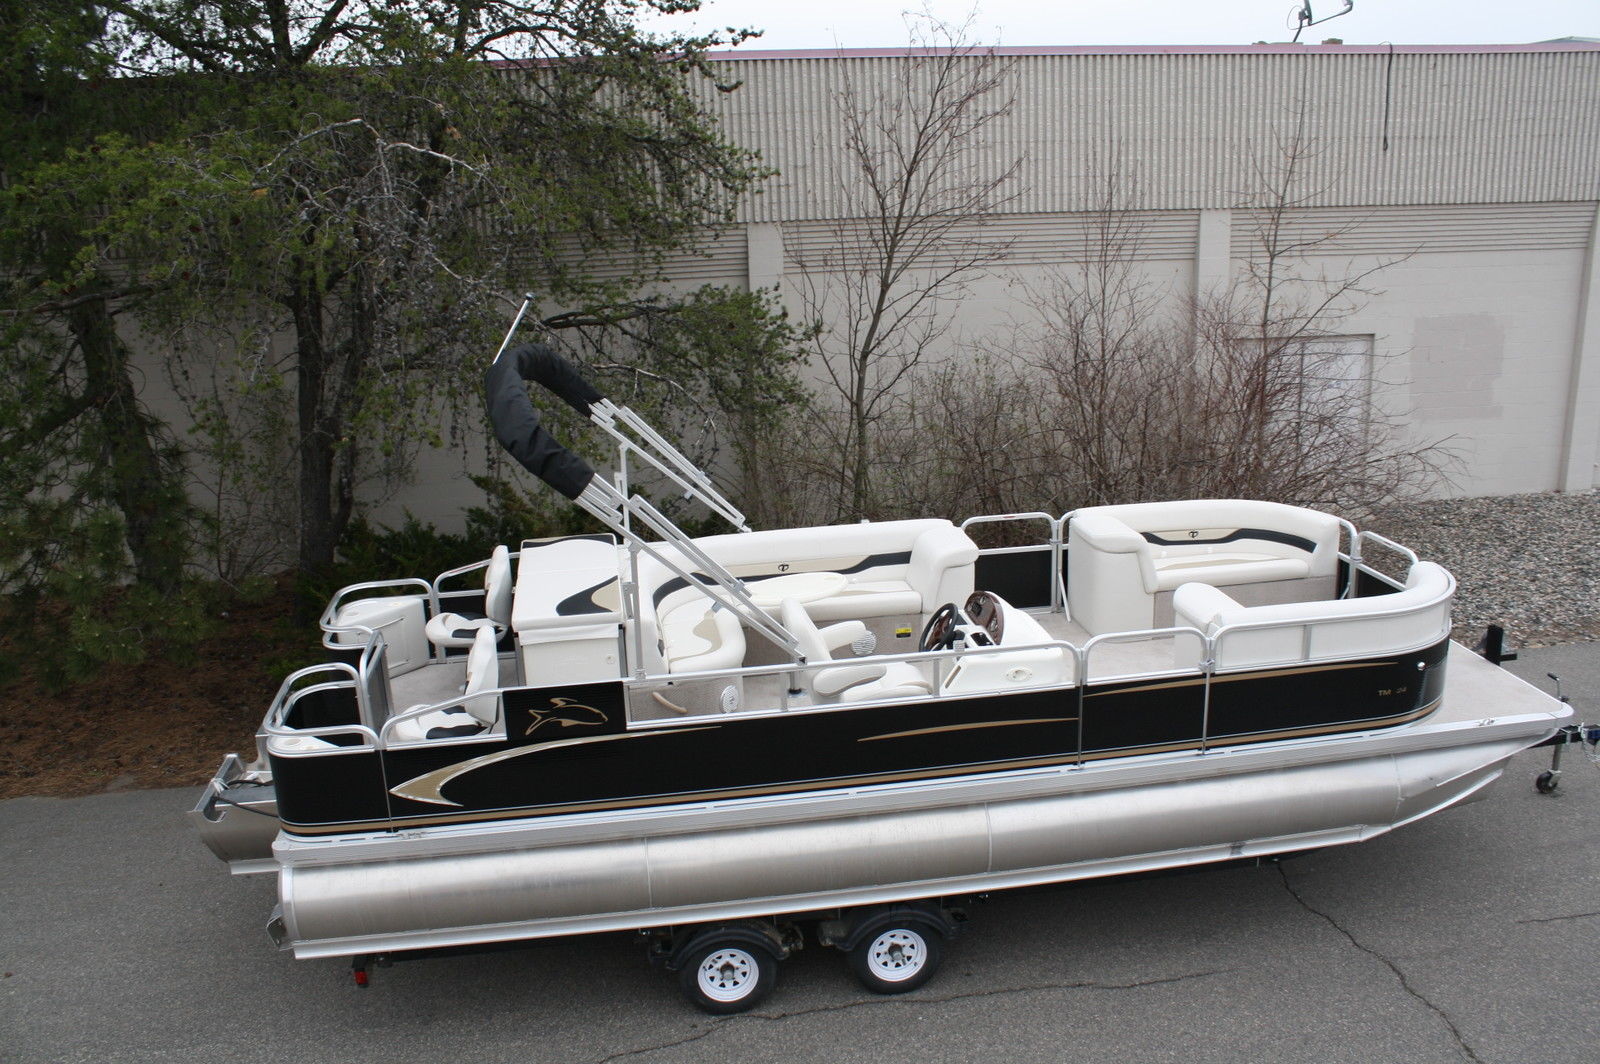 Tahoe 24 REAR FISH TRITOON 2013 for sale for $19,999 